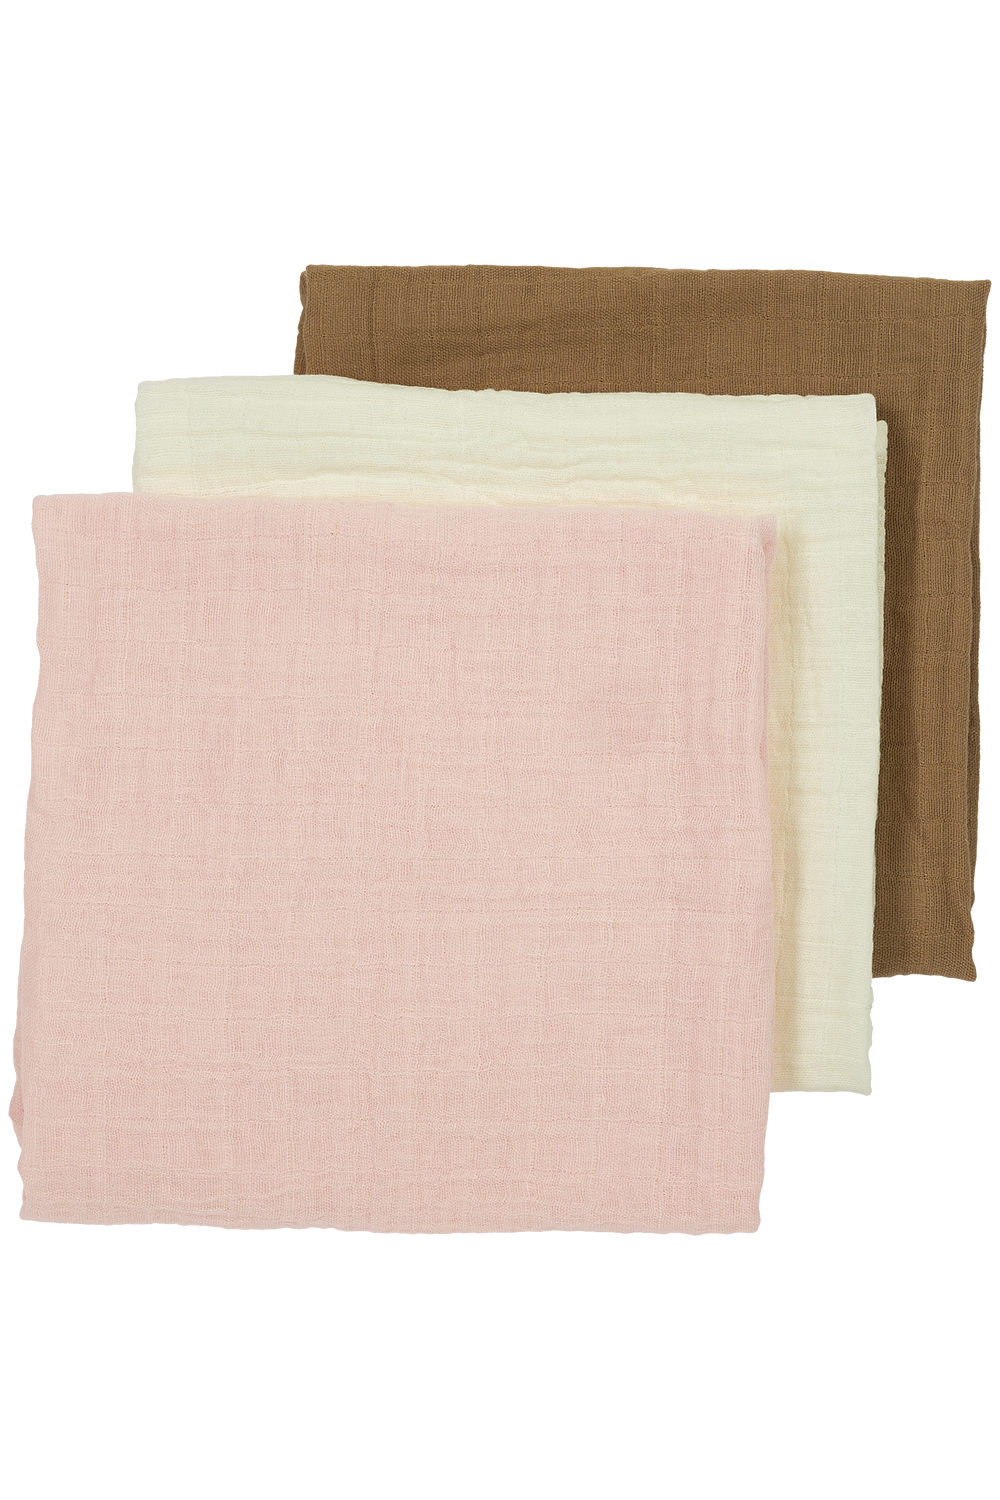 Square 3-pack Uni - offwhite/soft pink/toffee - 70x70cm